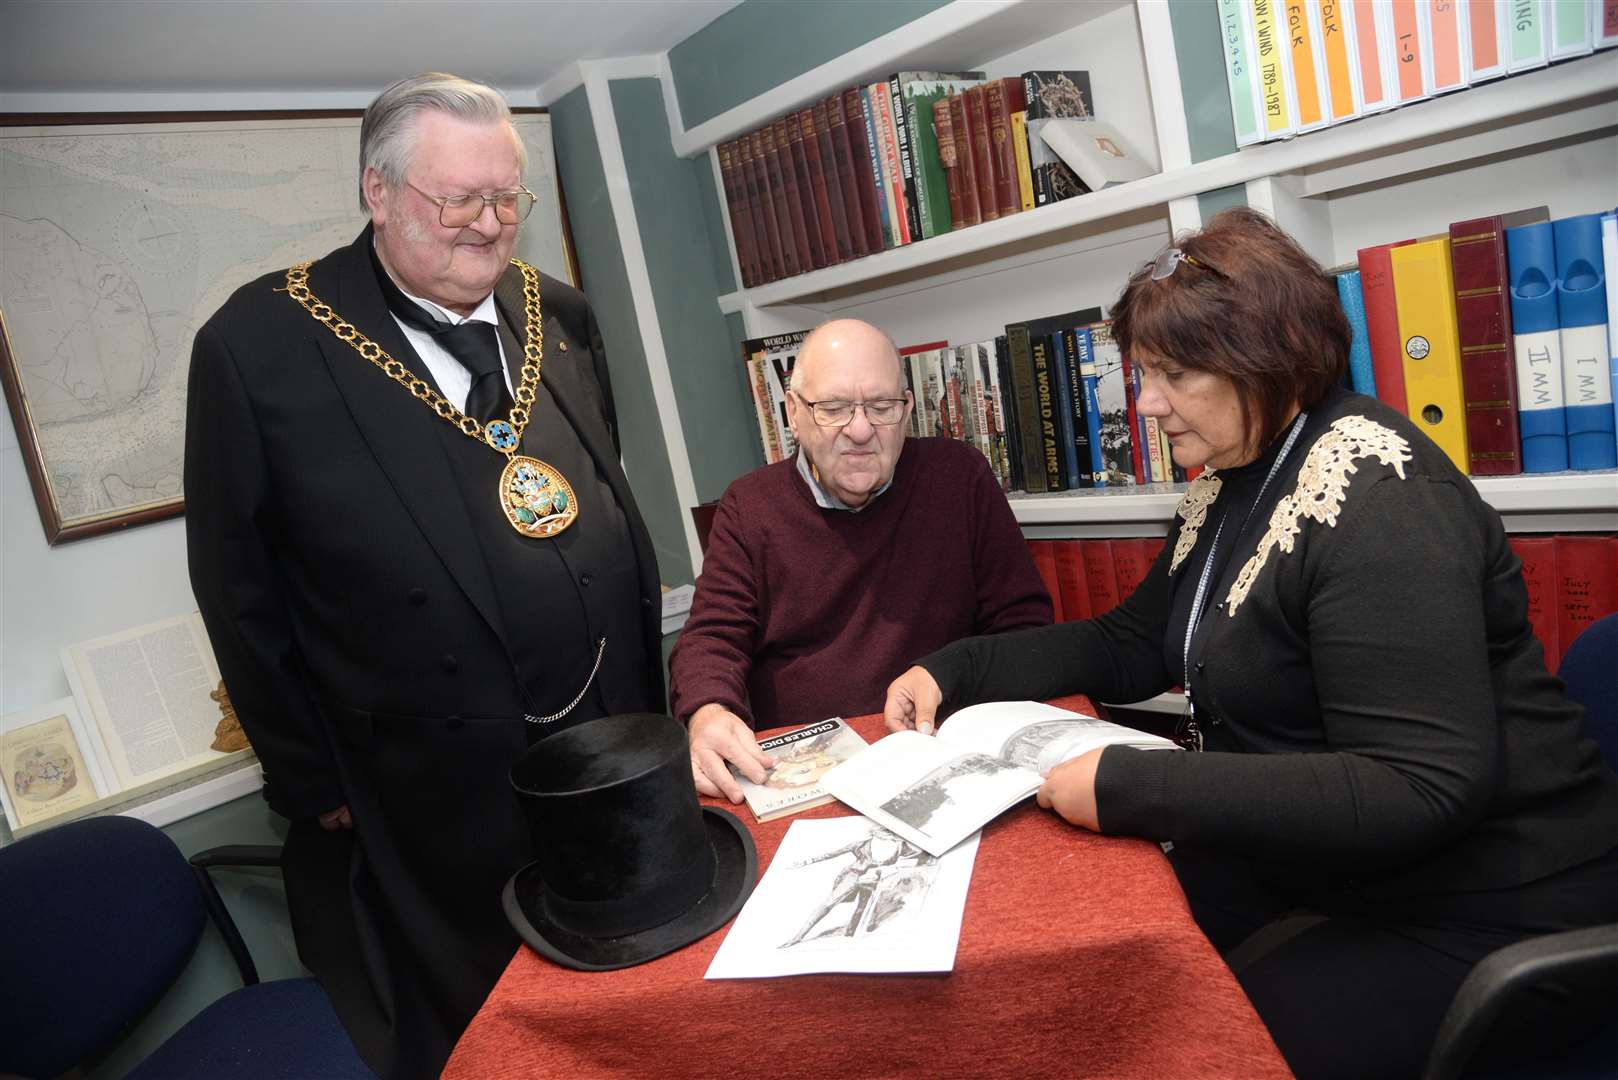 Mayor of Swale Cllr Ken Ingleton at the launch of the Charles Dickens exhibition at the Criterion Theatre in Blue Town on Thursday with trustee Mike Brown and director Jenny Hurkett in the research room. Picture: Chris Davey